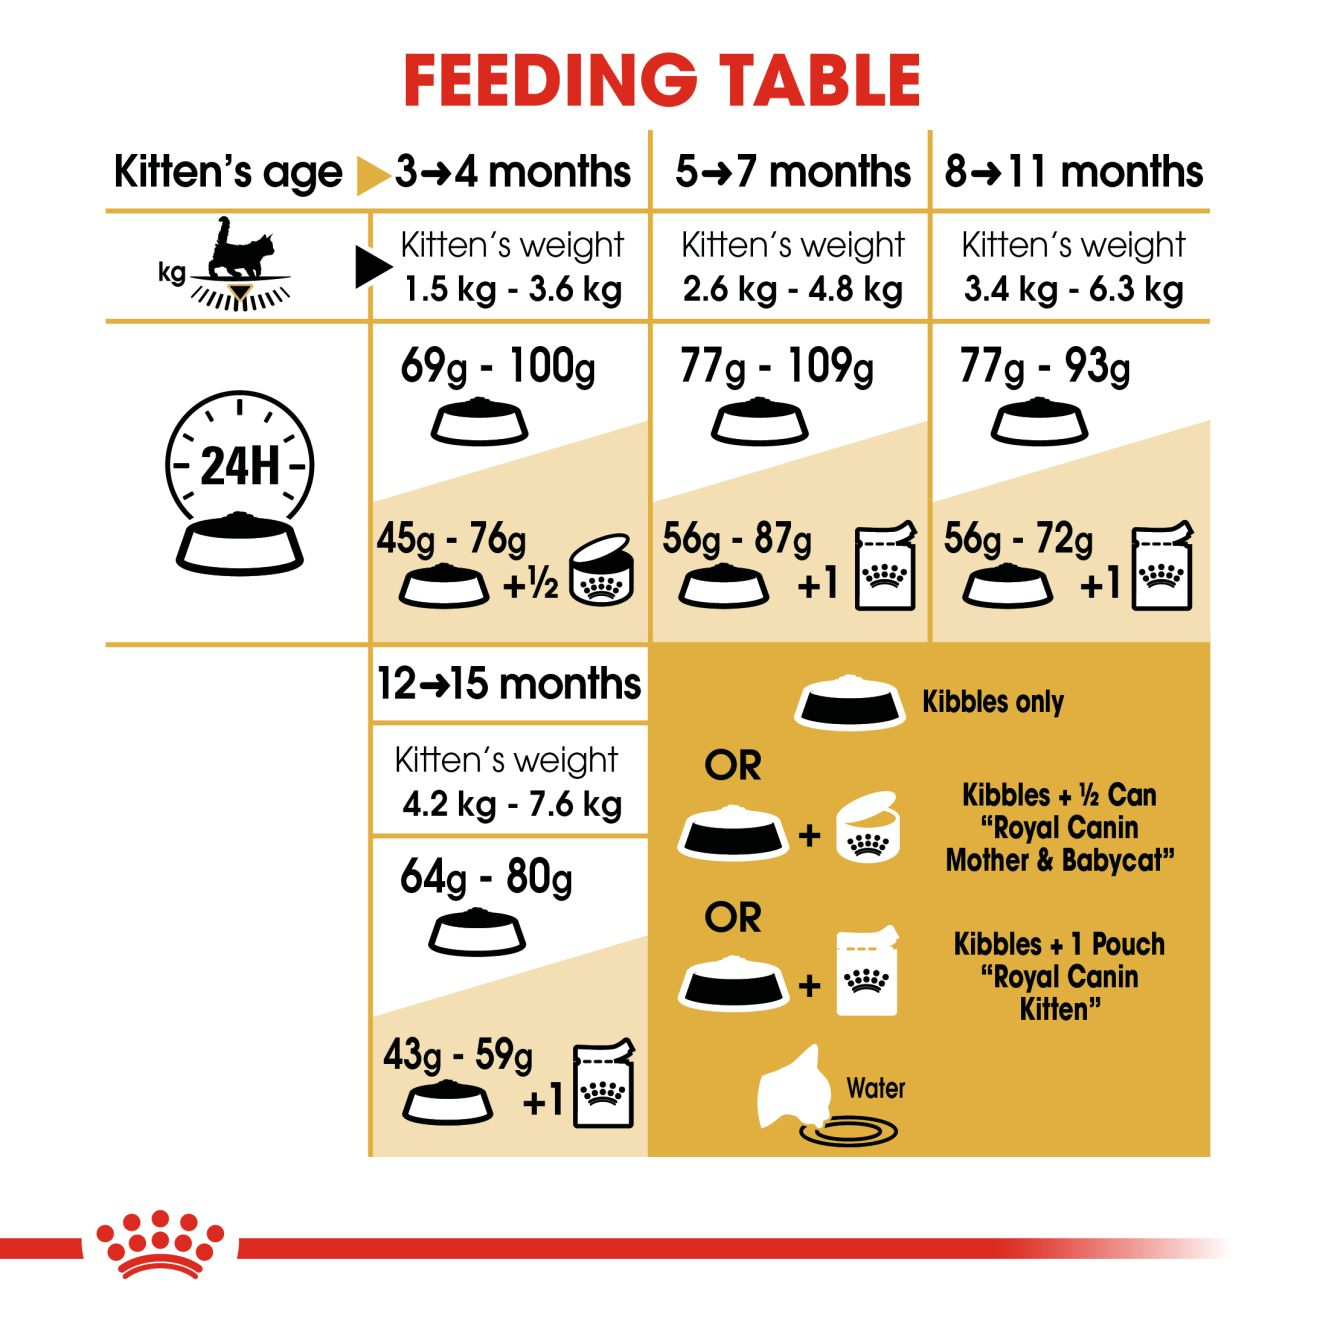 royal canin maine coon kitten wet food